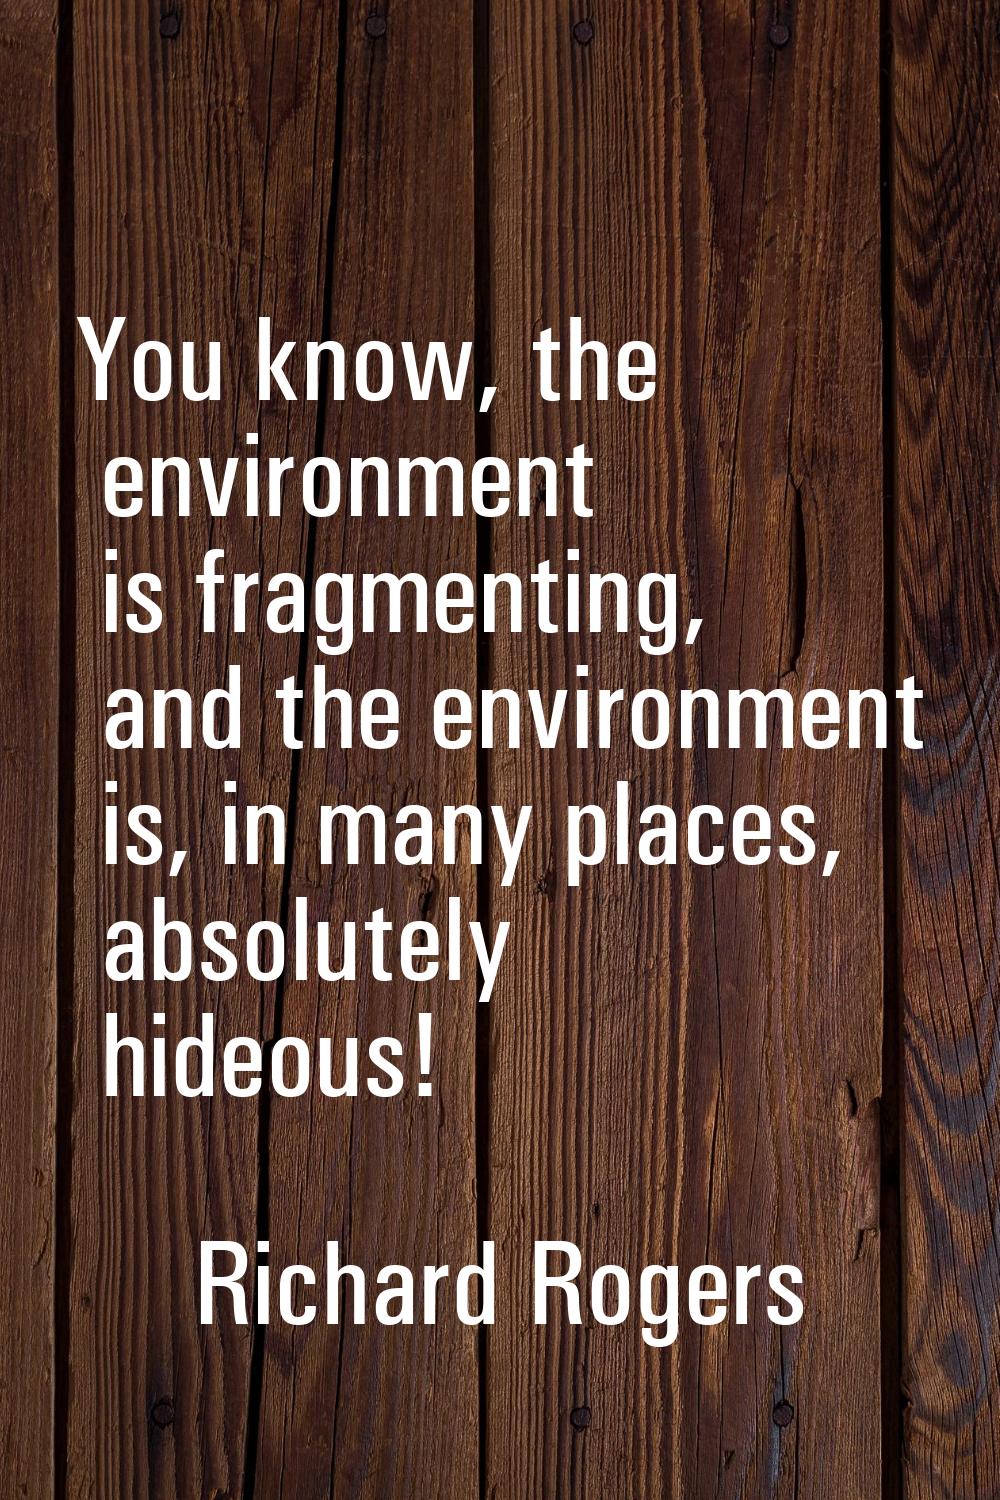 You know, the environment is fragmenting, and the environment is, in many places, absolutely hideou